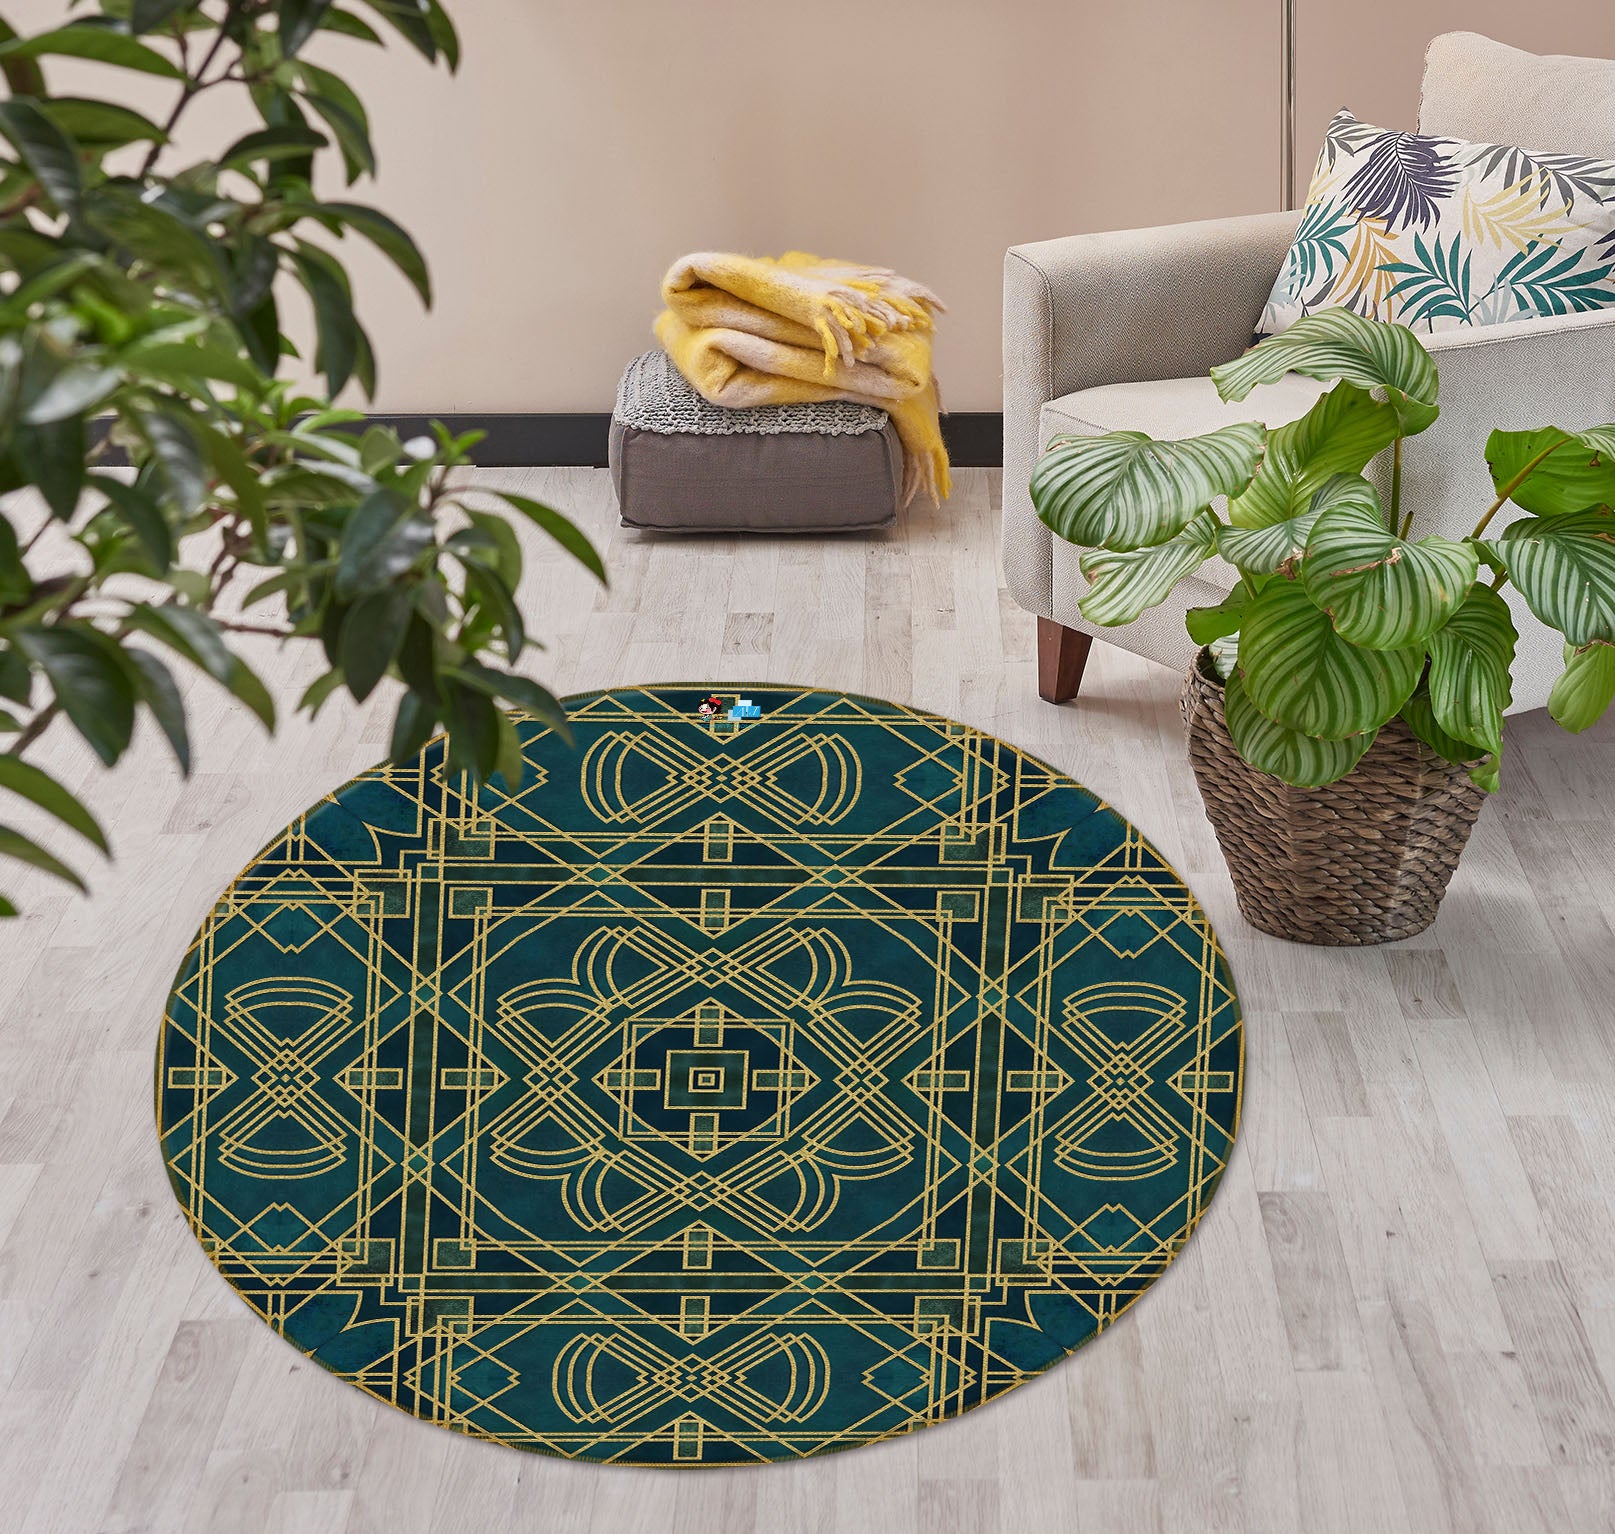 3D Pattern Lines 83044 Andrea haase Rug Round Non Slip Rug Mat